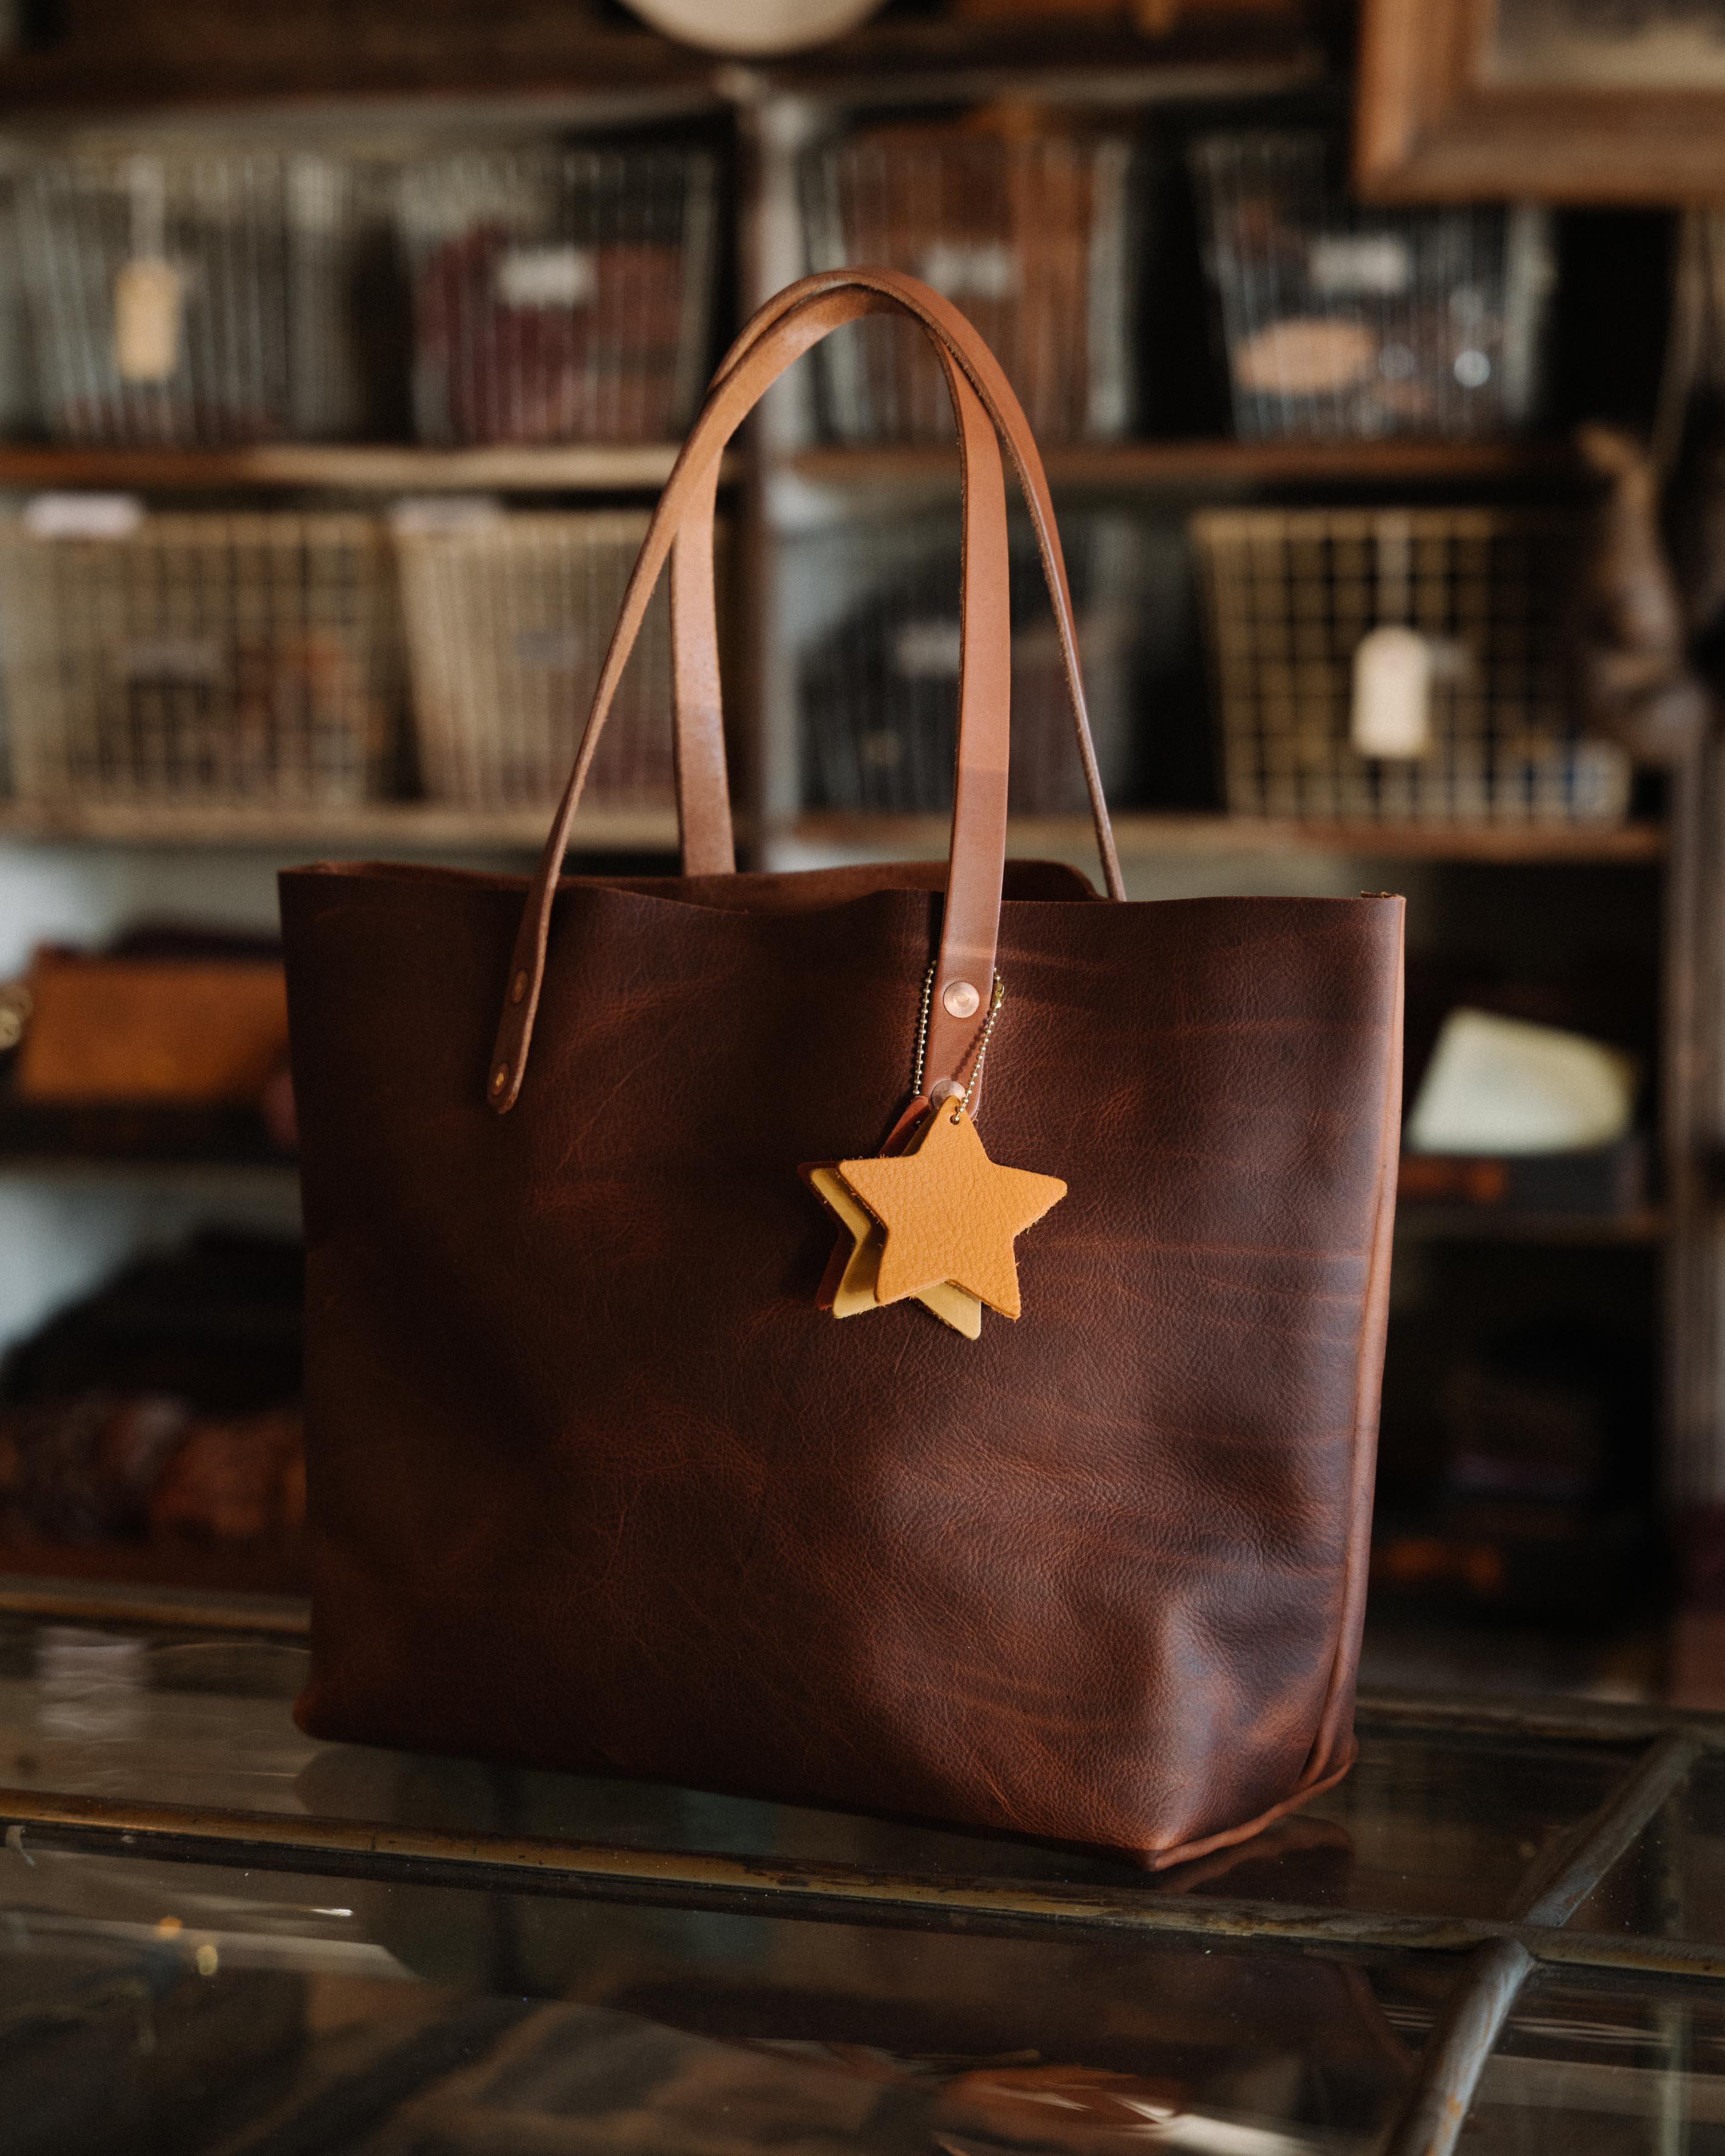 Vegetable Tanned Star Charms